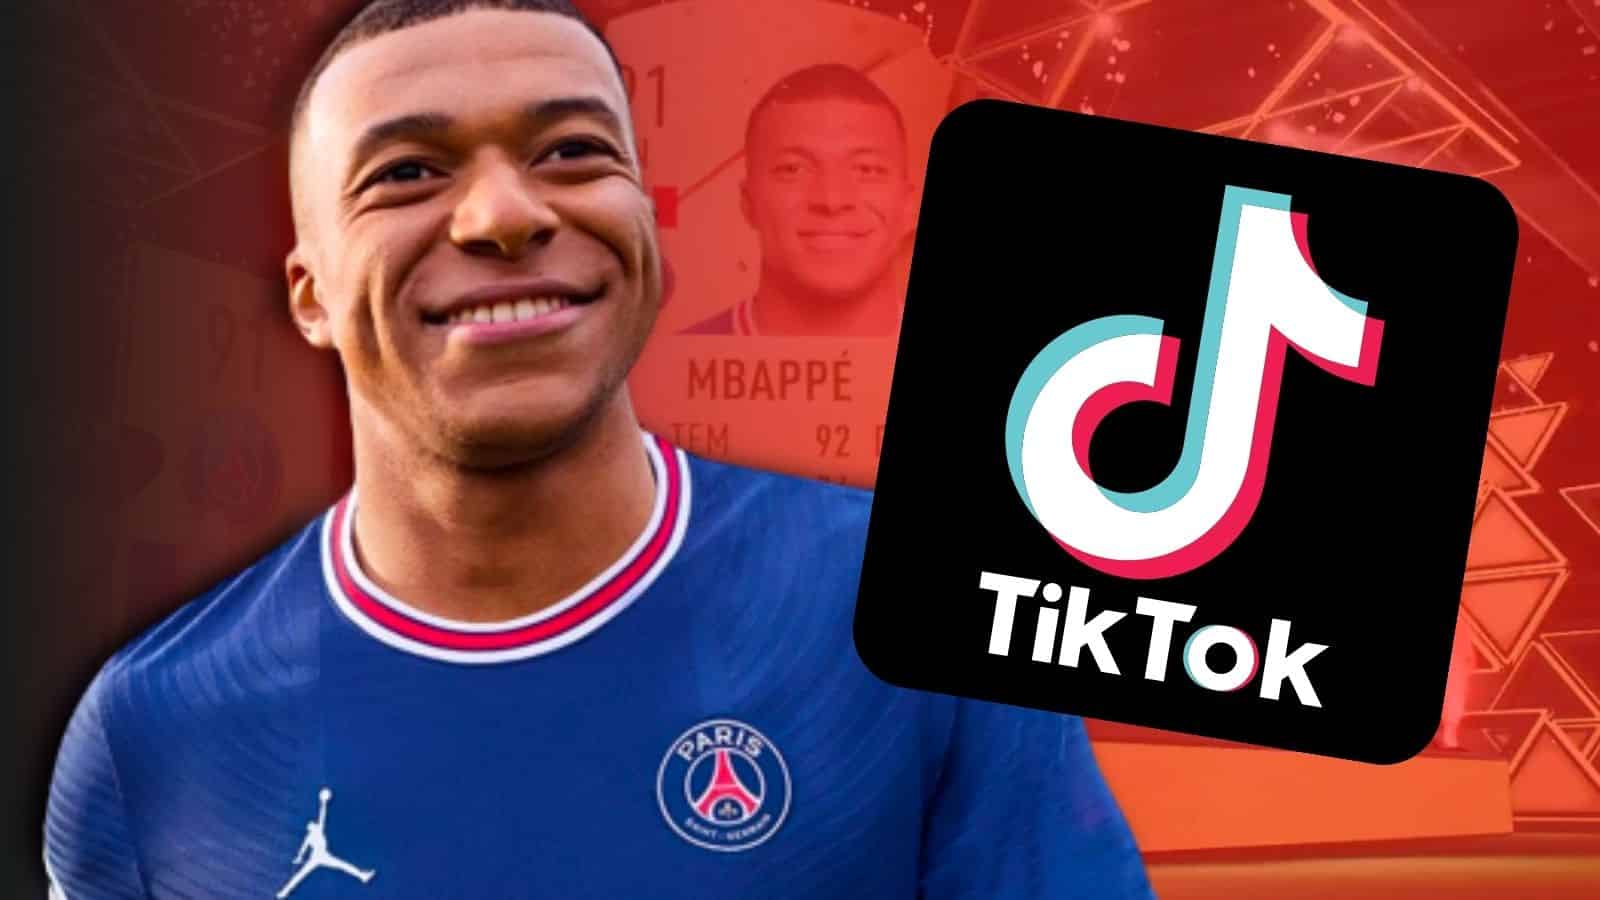 mbappe with fifa 22 pack on tiktok